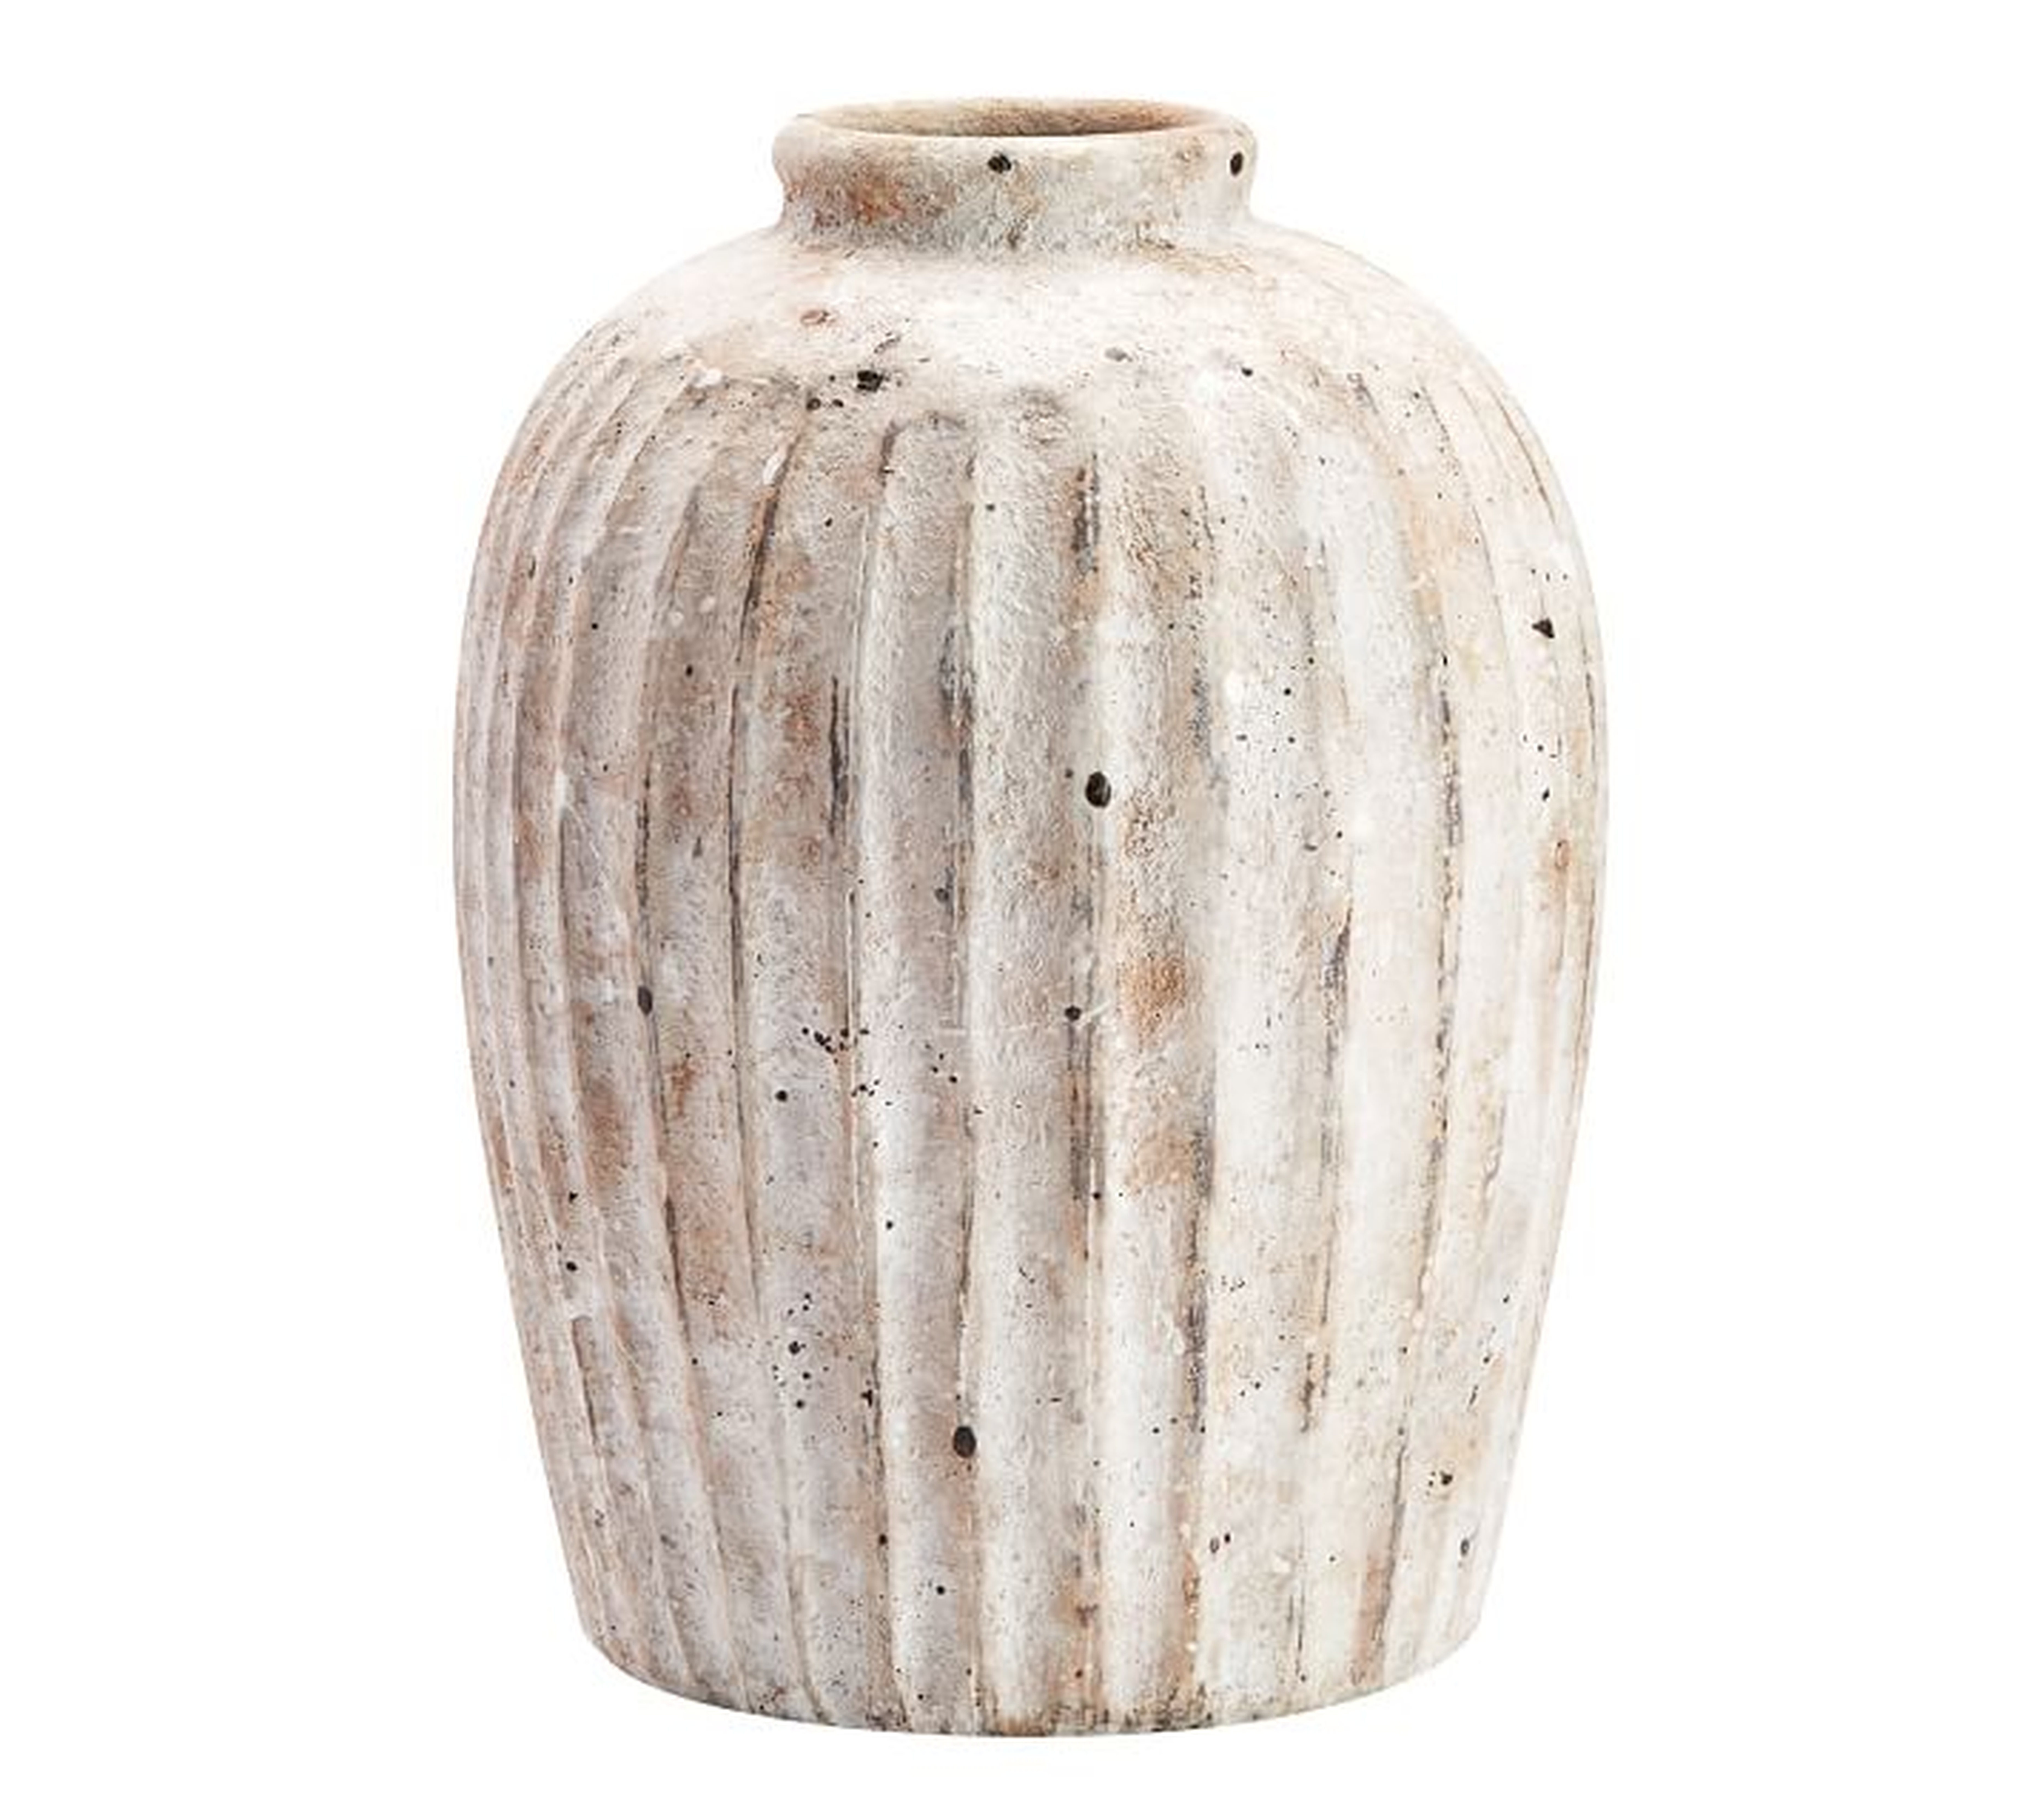 Handcrafted Weathered Terra Cotta Vases - Pottery Barn